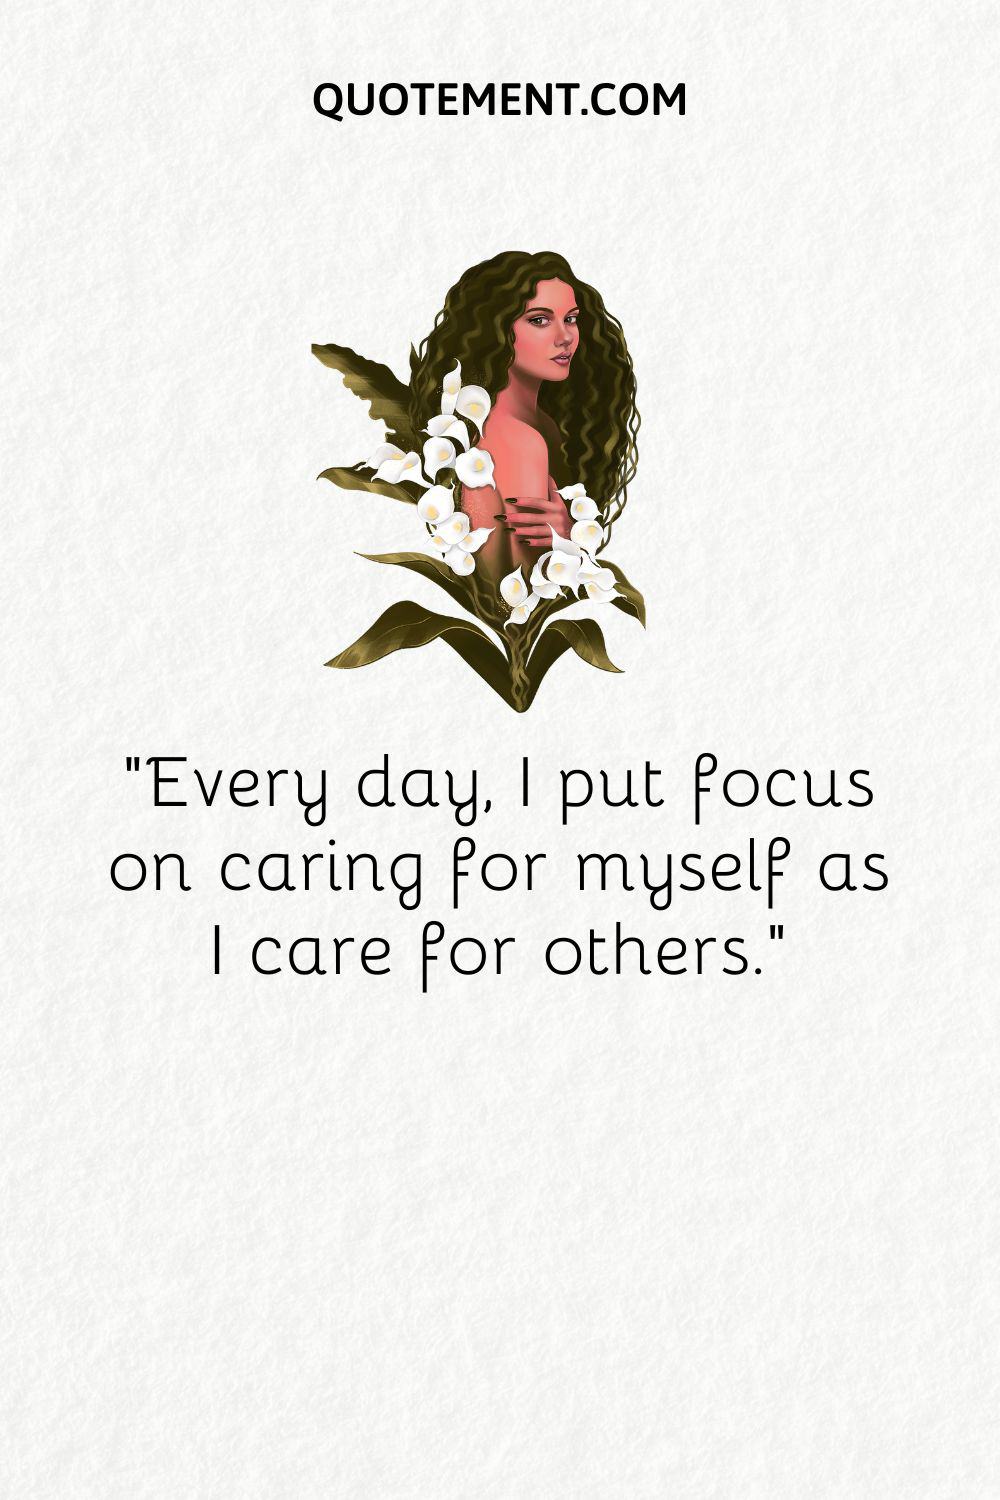 Every day, I put focus on caring for myself as I care for others